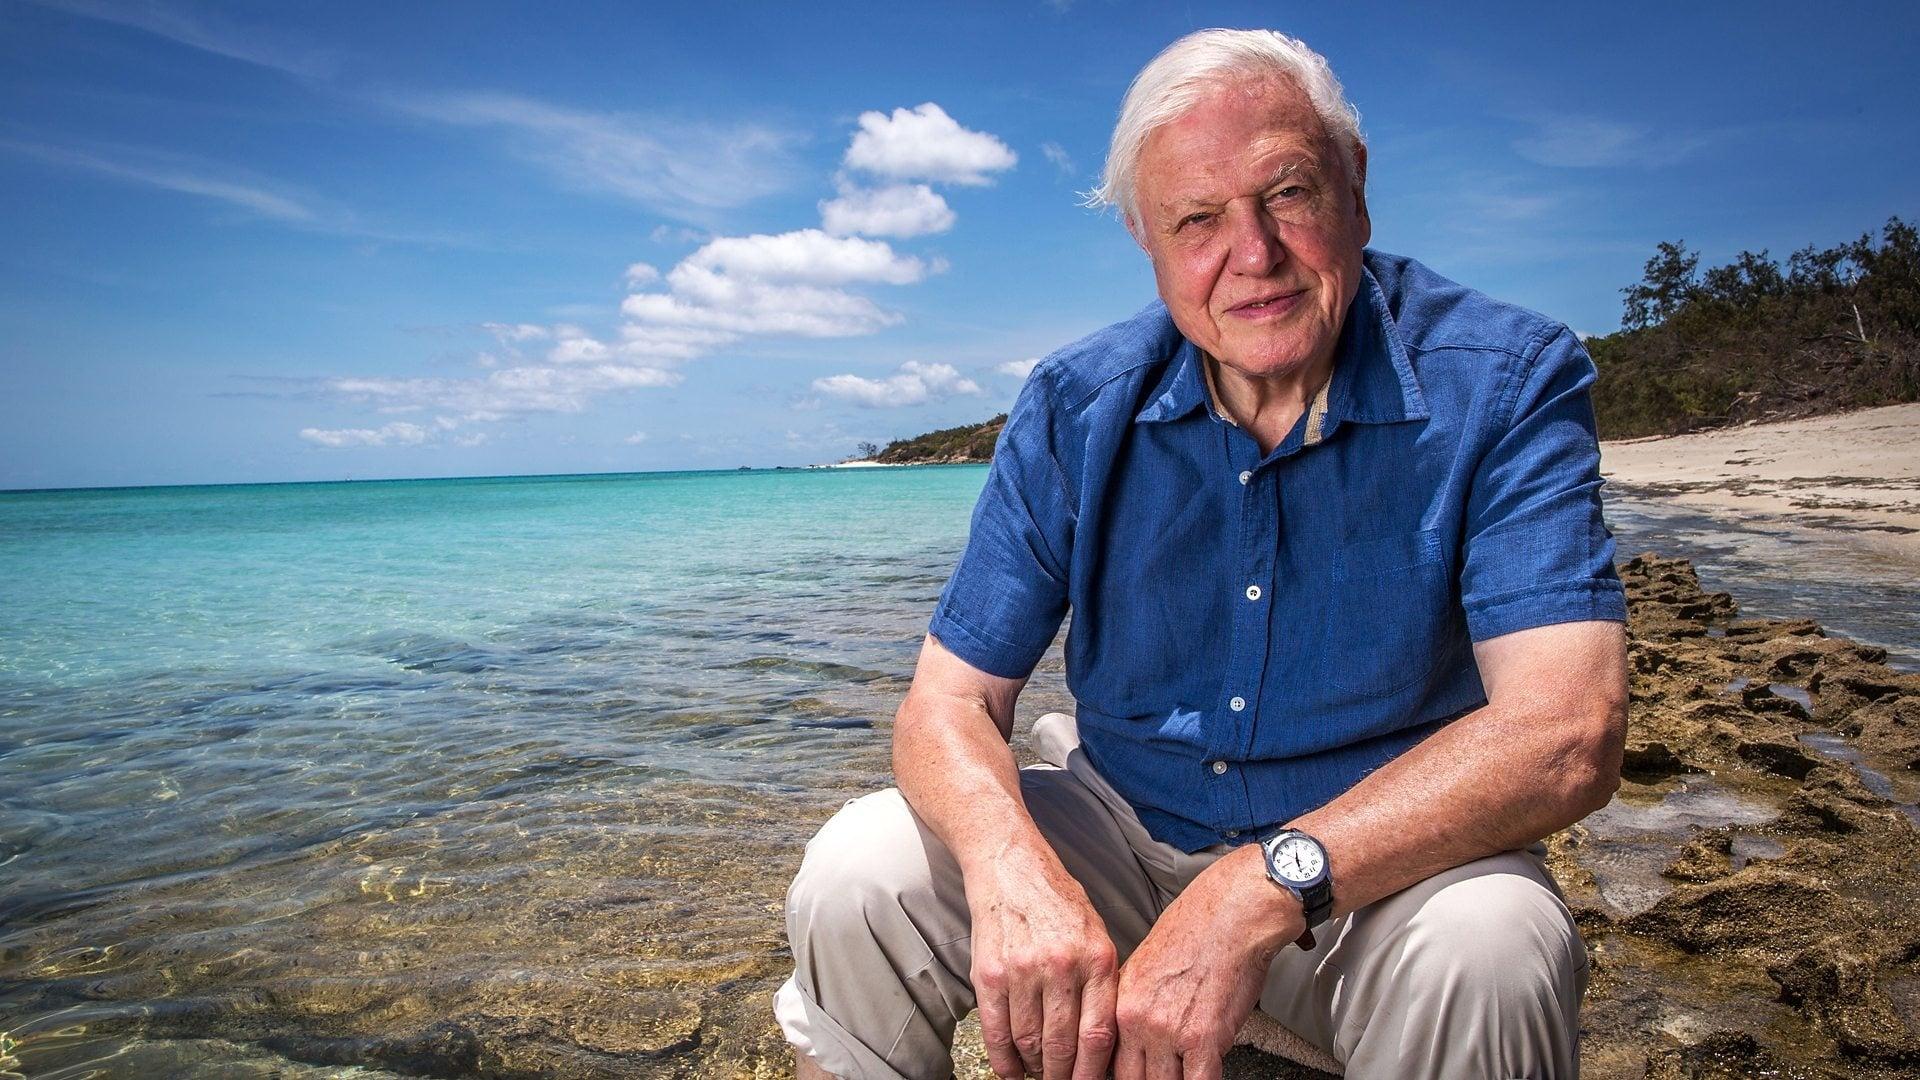 Great Barrier Reef with David Attenborough backdrop